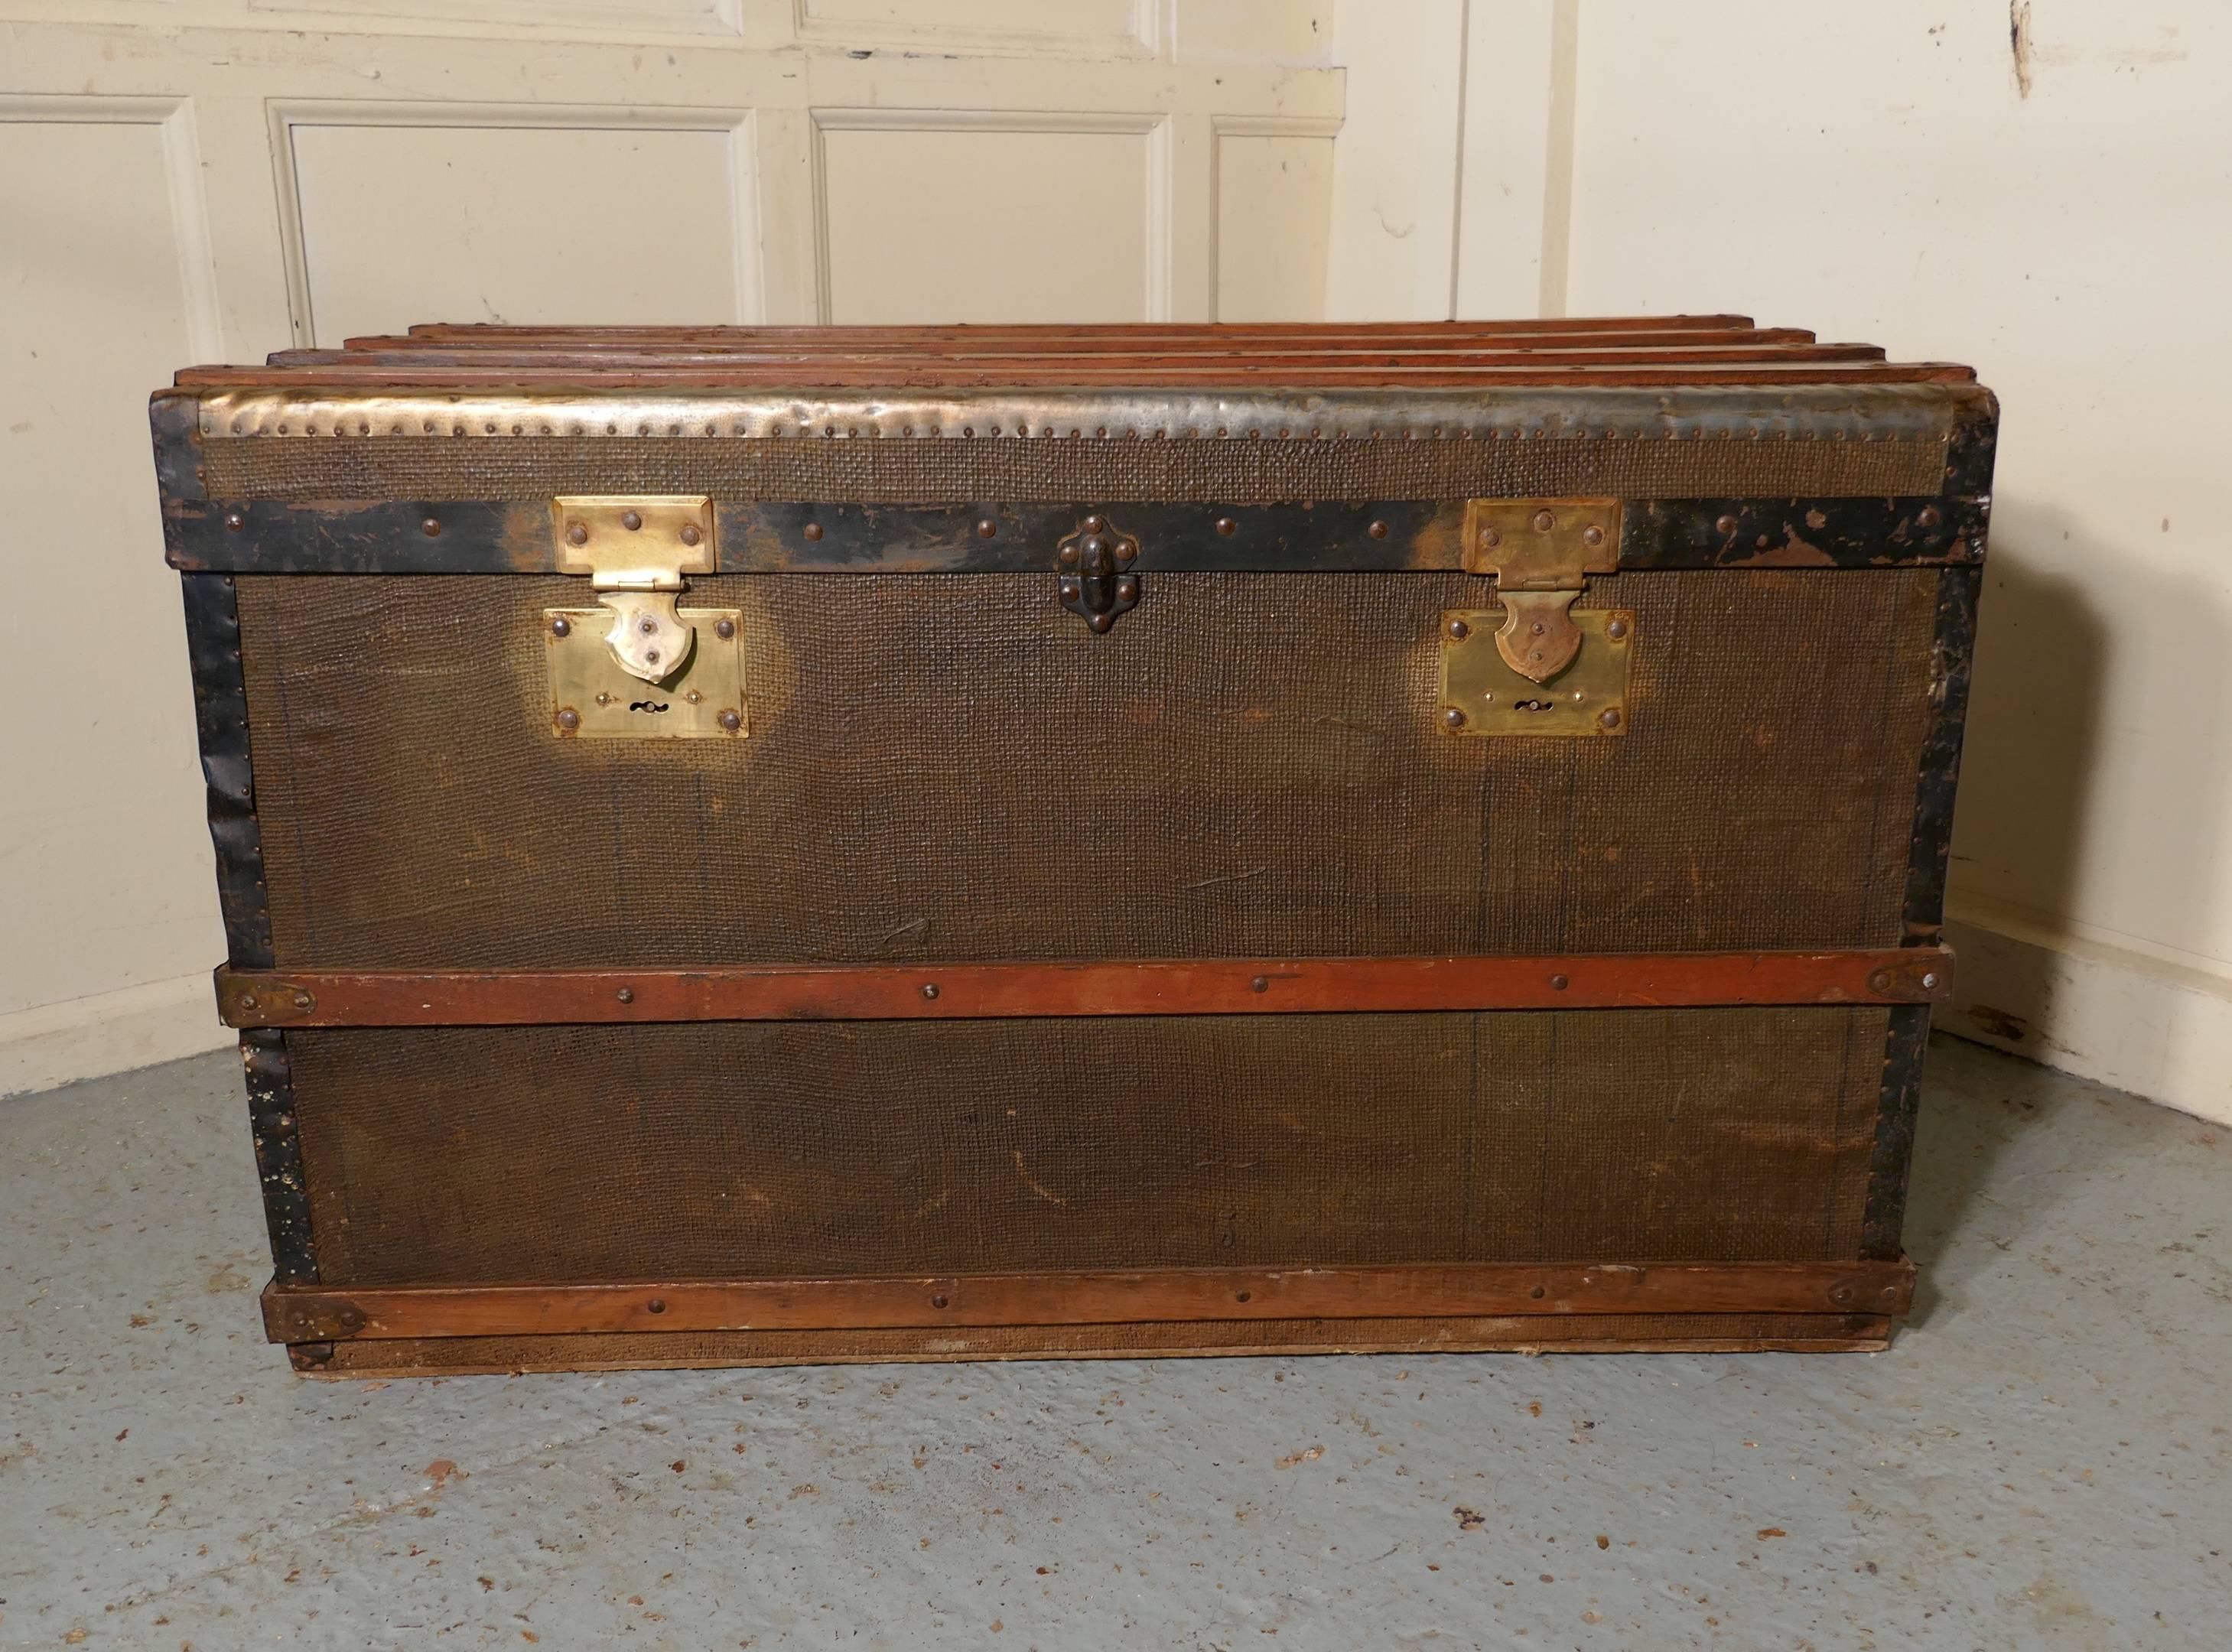 A vintage brass and bound canvas travel steamer trunk

A very useful decorative suitcase or travel trunk, it is lined in checked paper fabric, it has a fitted section inside with two removable trays at the top
The Trunk is canvas covered, it has